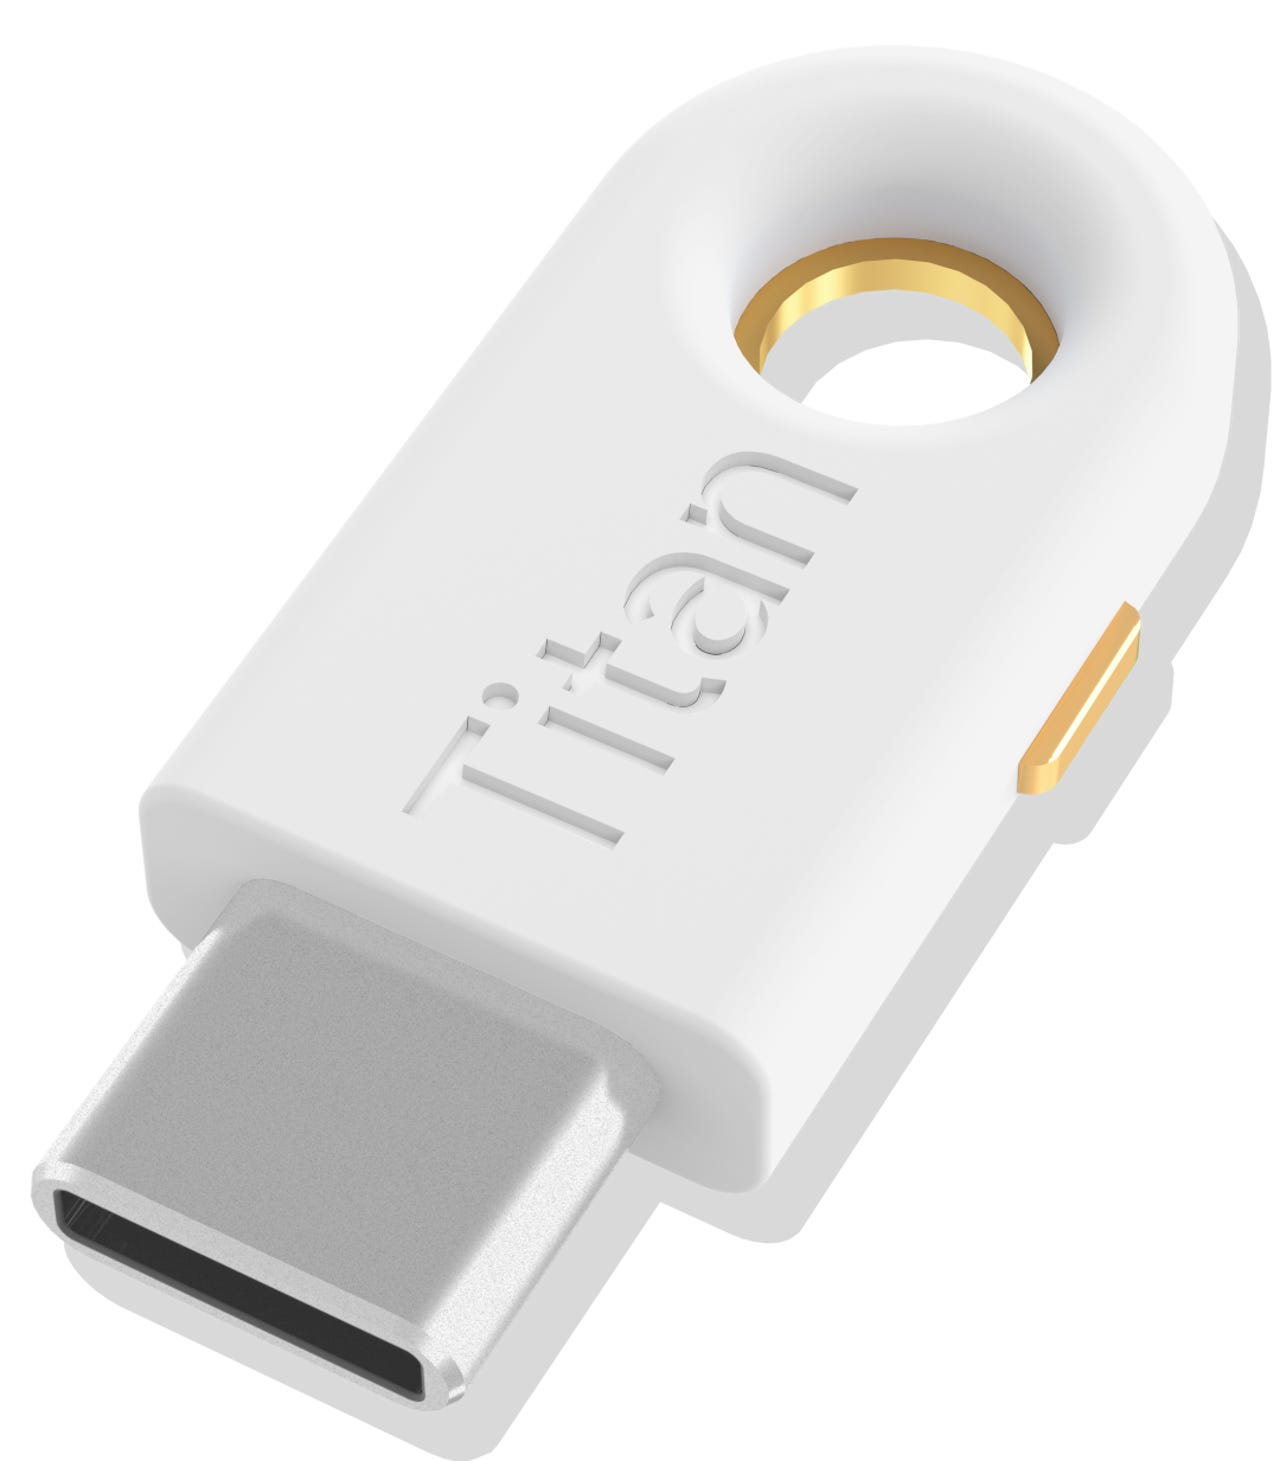 usb-c-titan-security-key-angled-view2.png